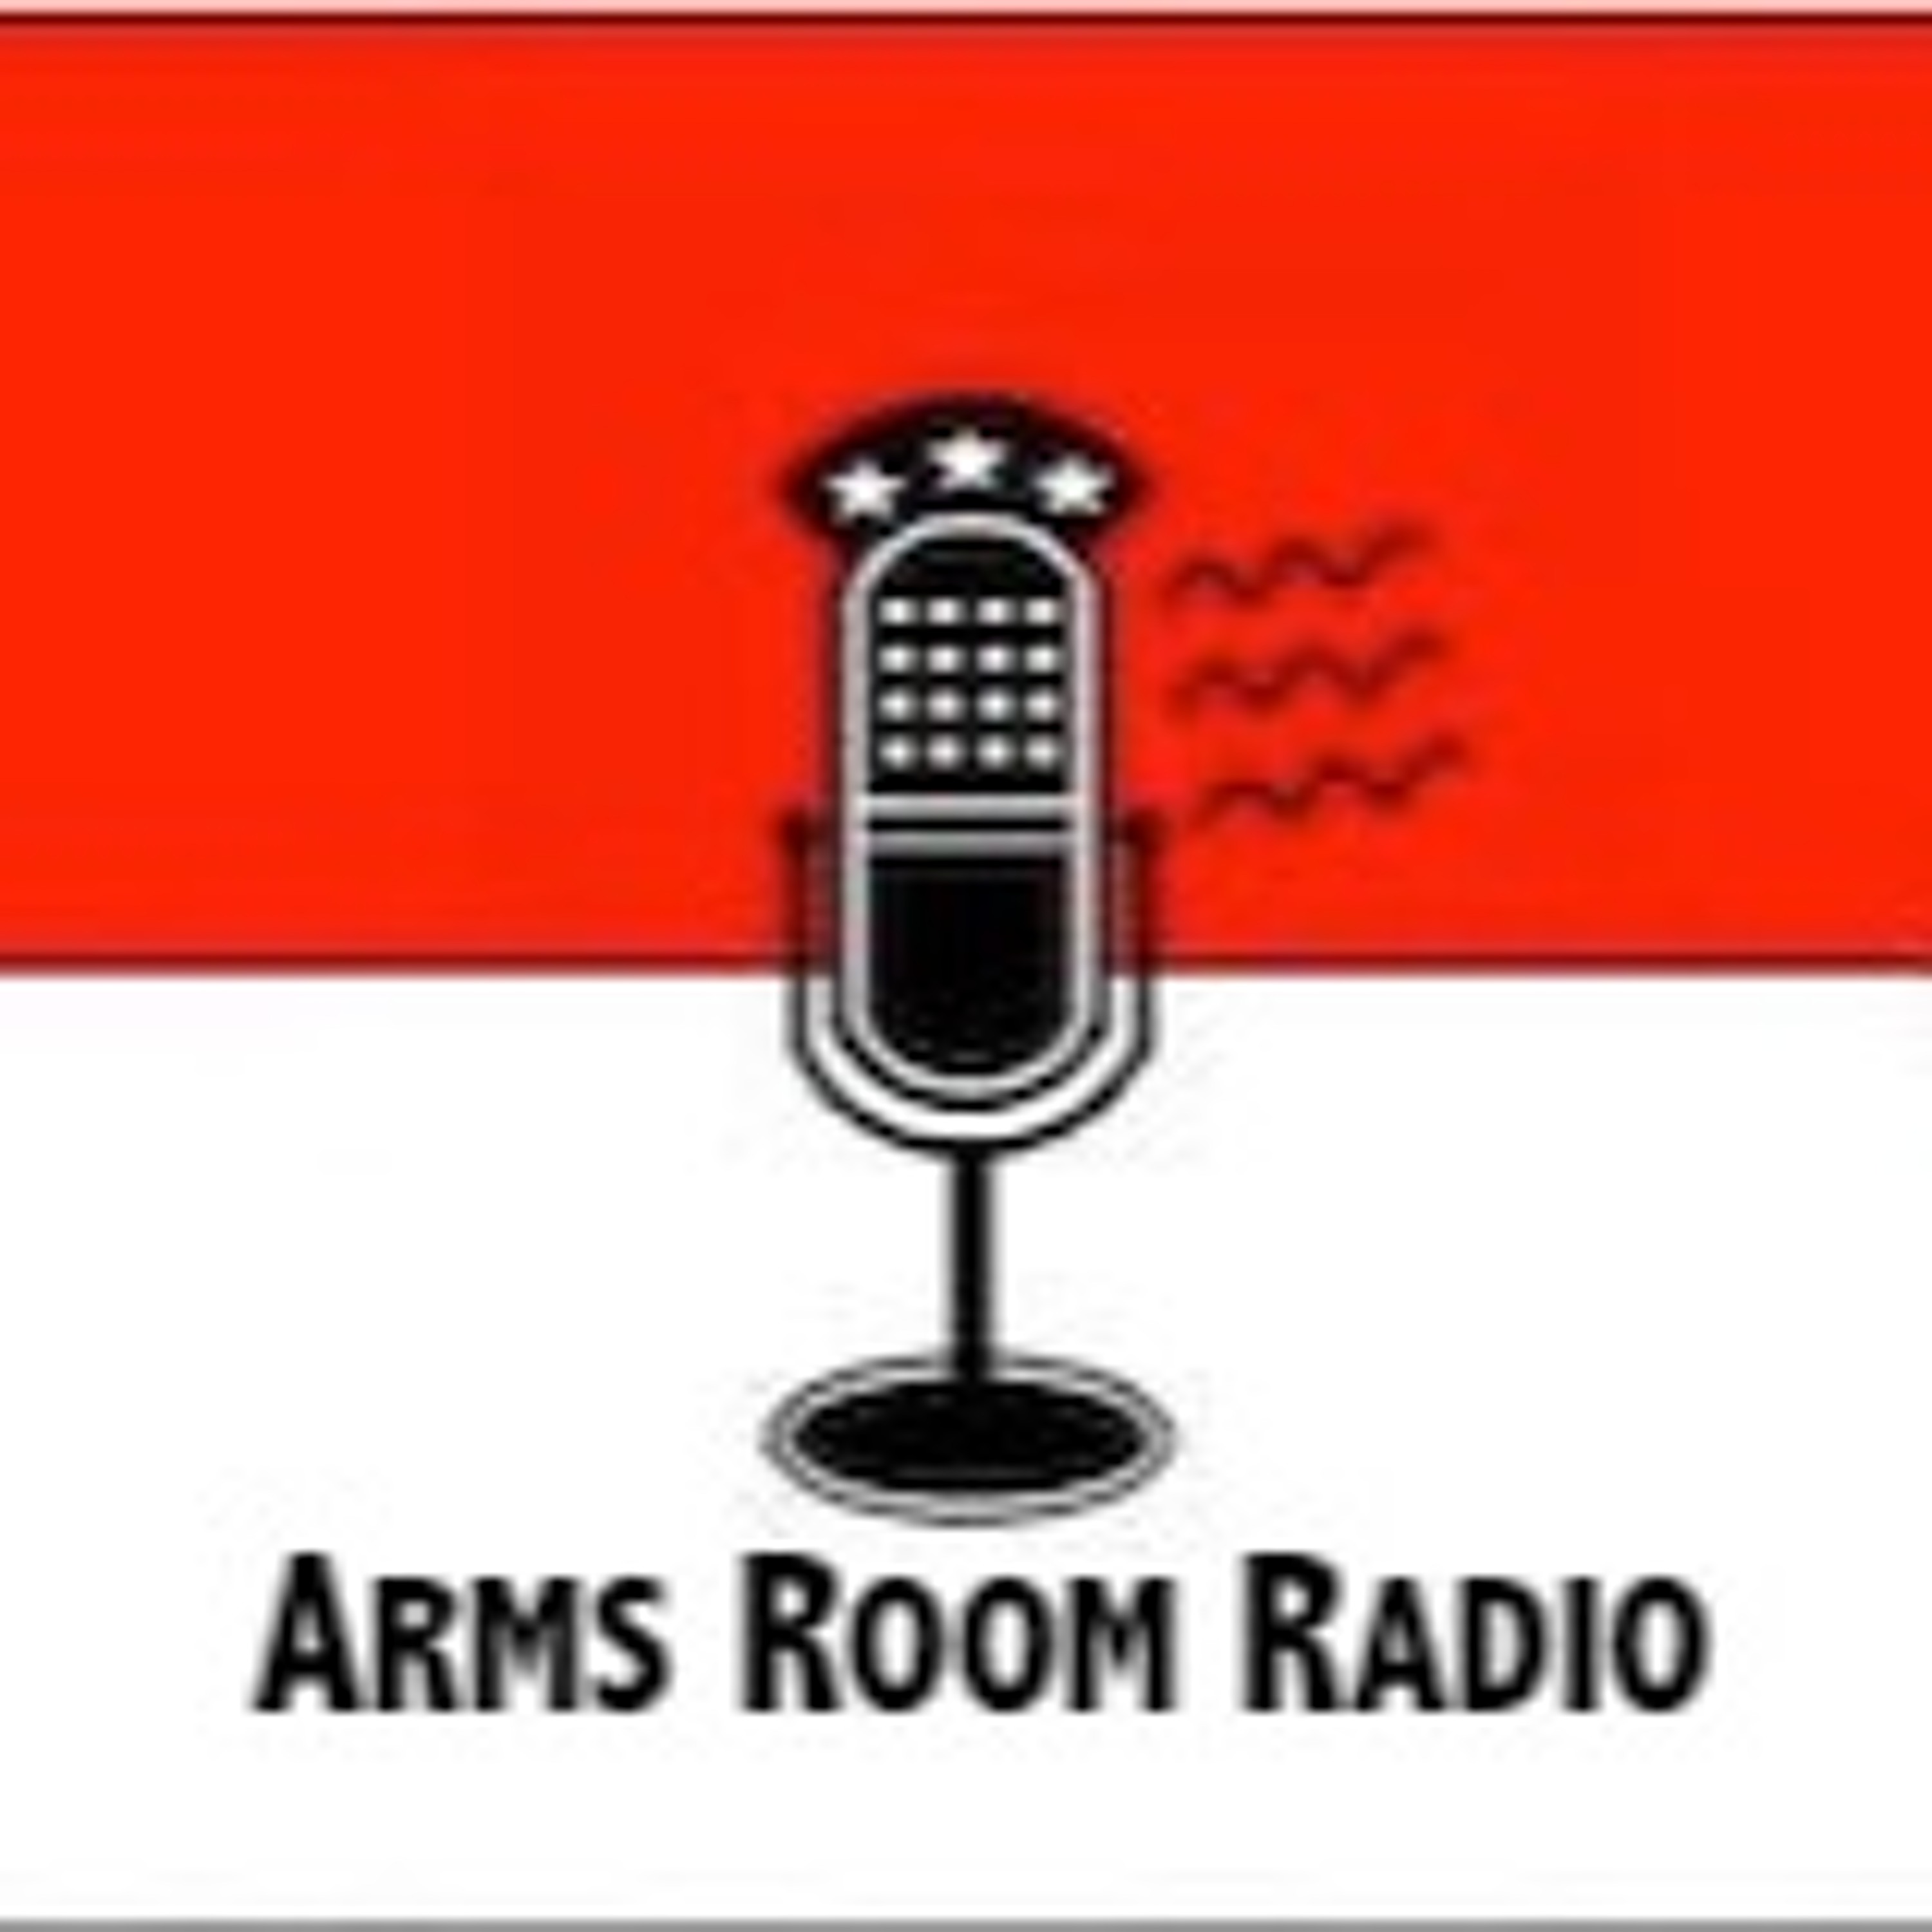 ArmsRoomRadio 06.29.19 Cannons, Cars, and Chad!